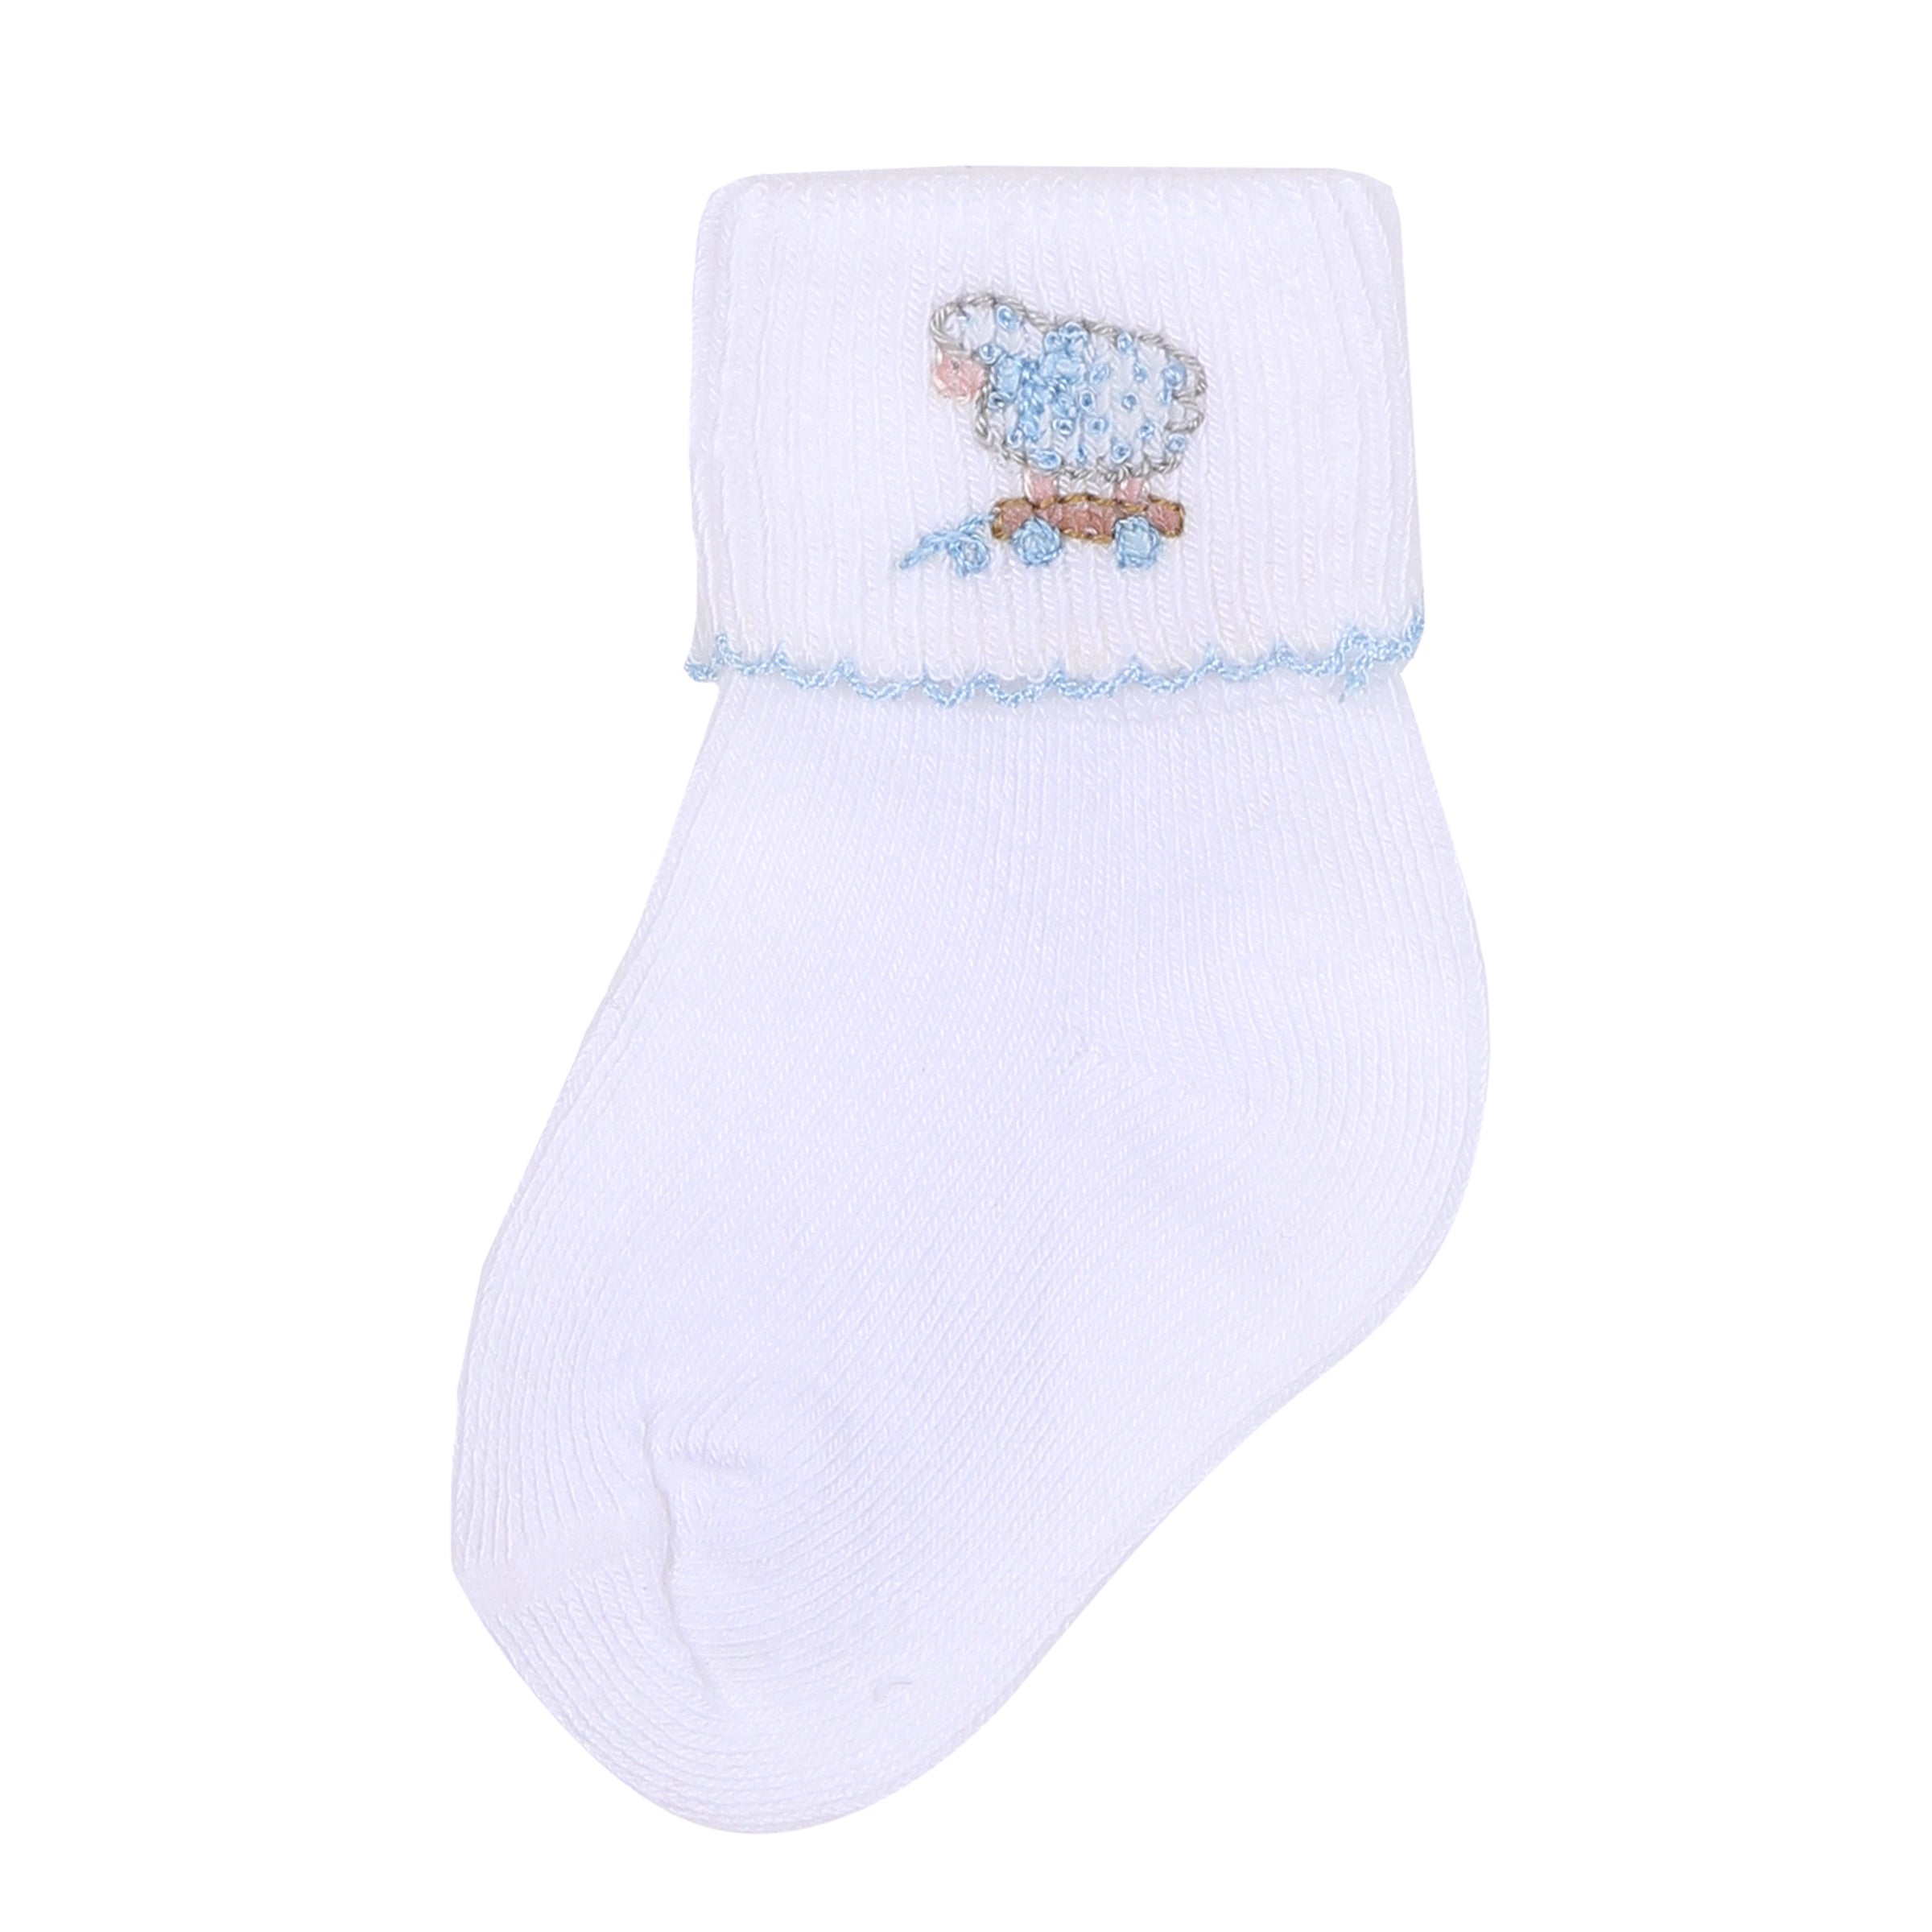 Darling Lambs Embroidered Socks - Blue